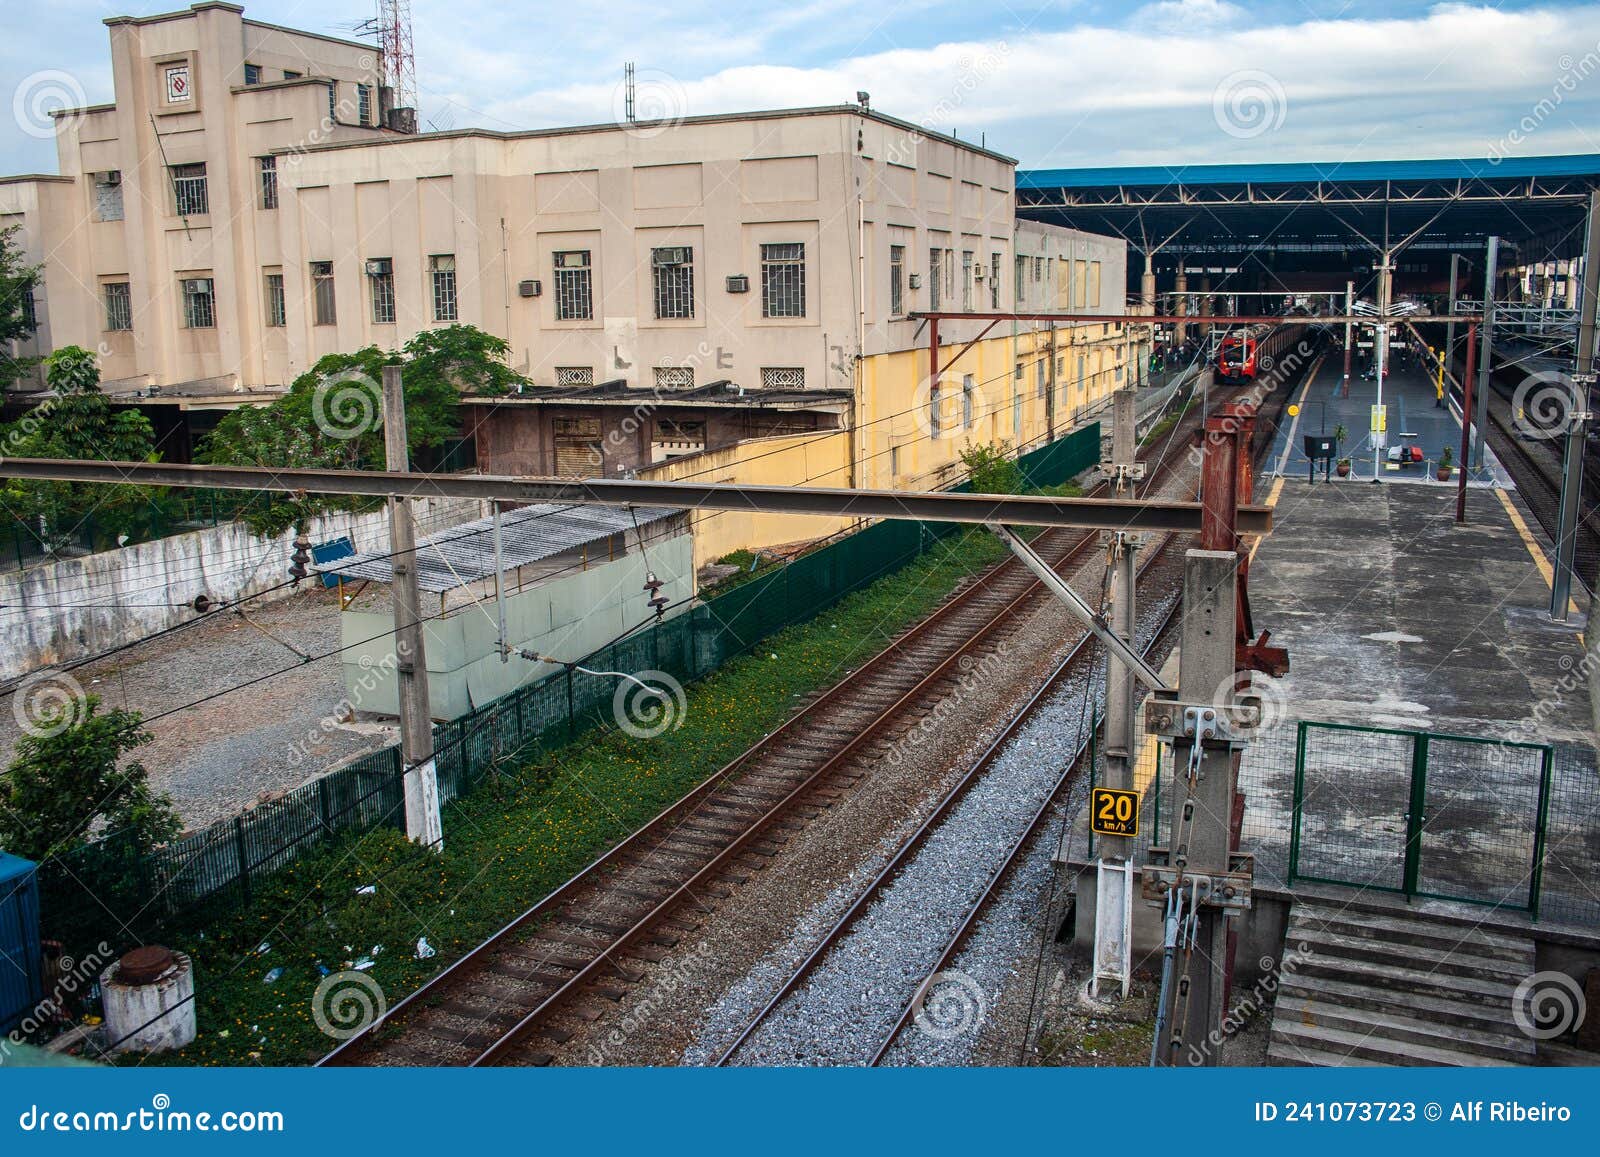 View of the Platform of Bras Station in Sao Paulo. Editorial Stock Photo -  Image of public, metro: 241073723